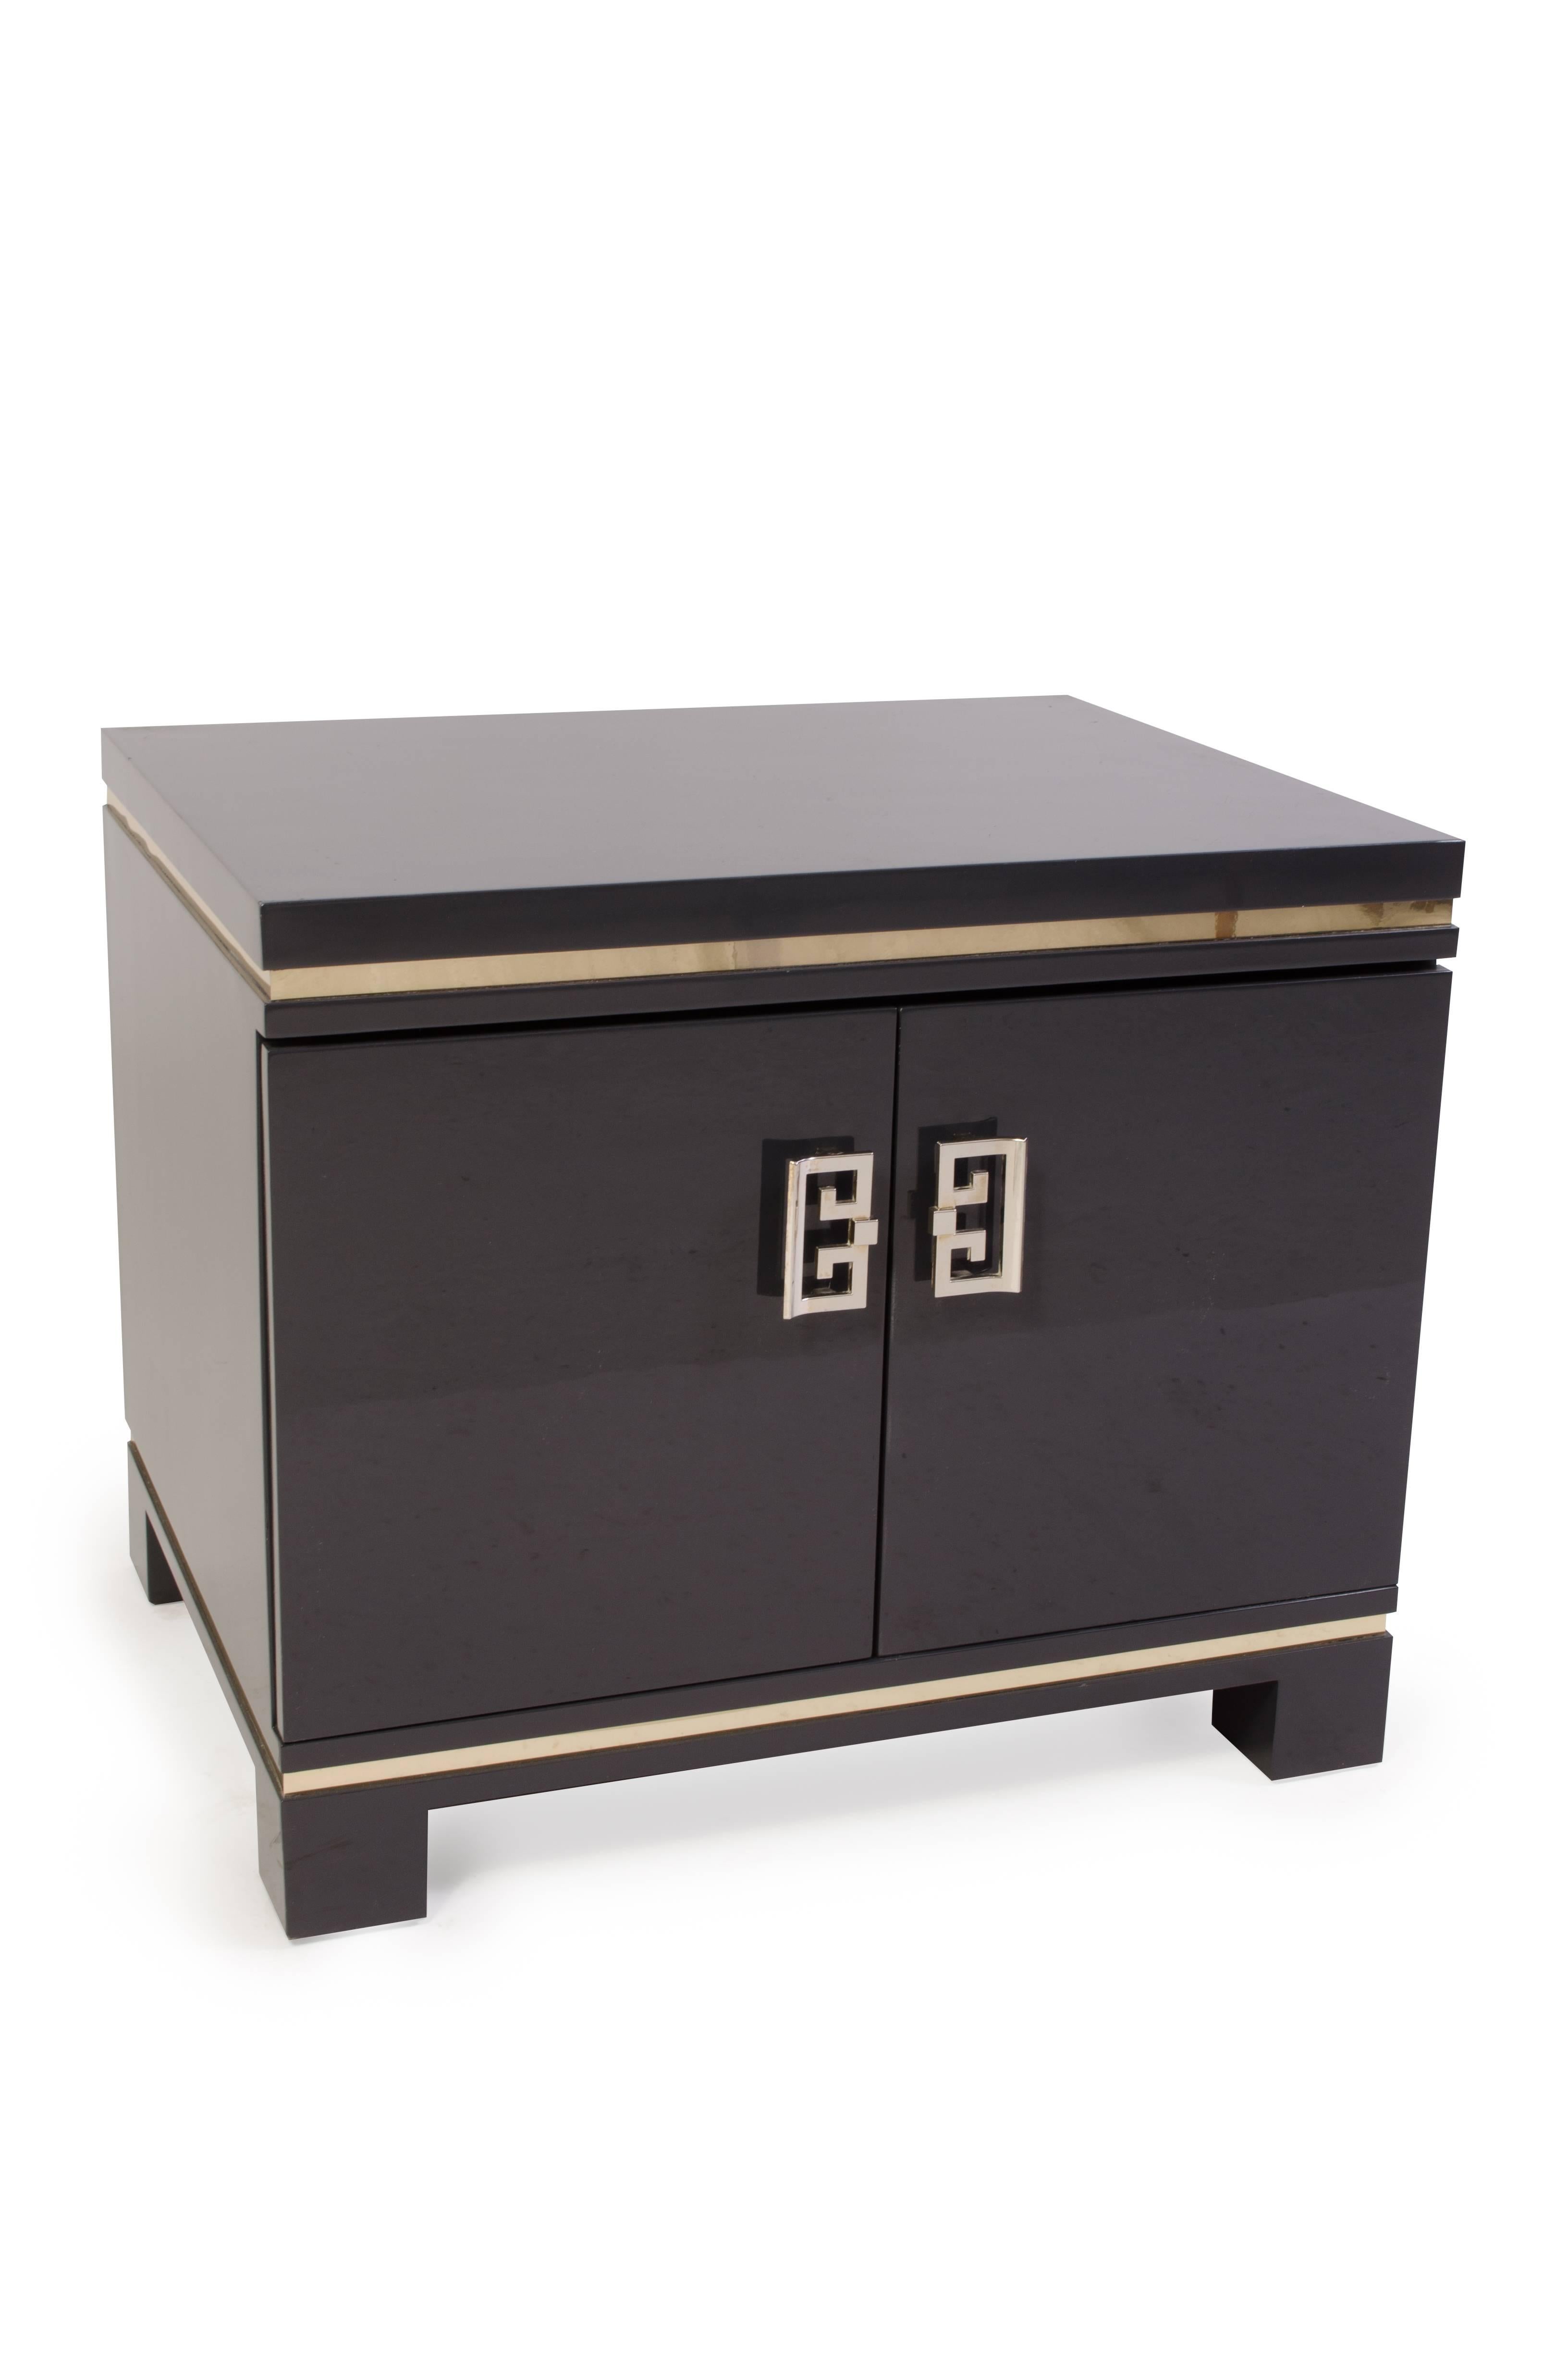 The perfect pair of nightstands with great Mid-Century style. Well proportioned design makes these perfect for both nightstands as well as side tables in a living space. Each with double door construction, an interior half shelf, top and bottom